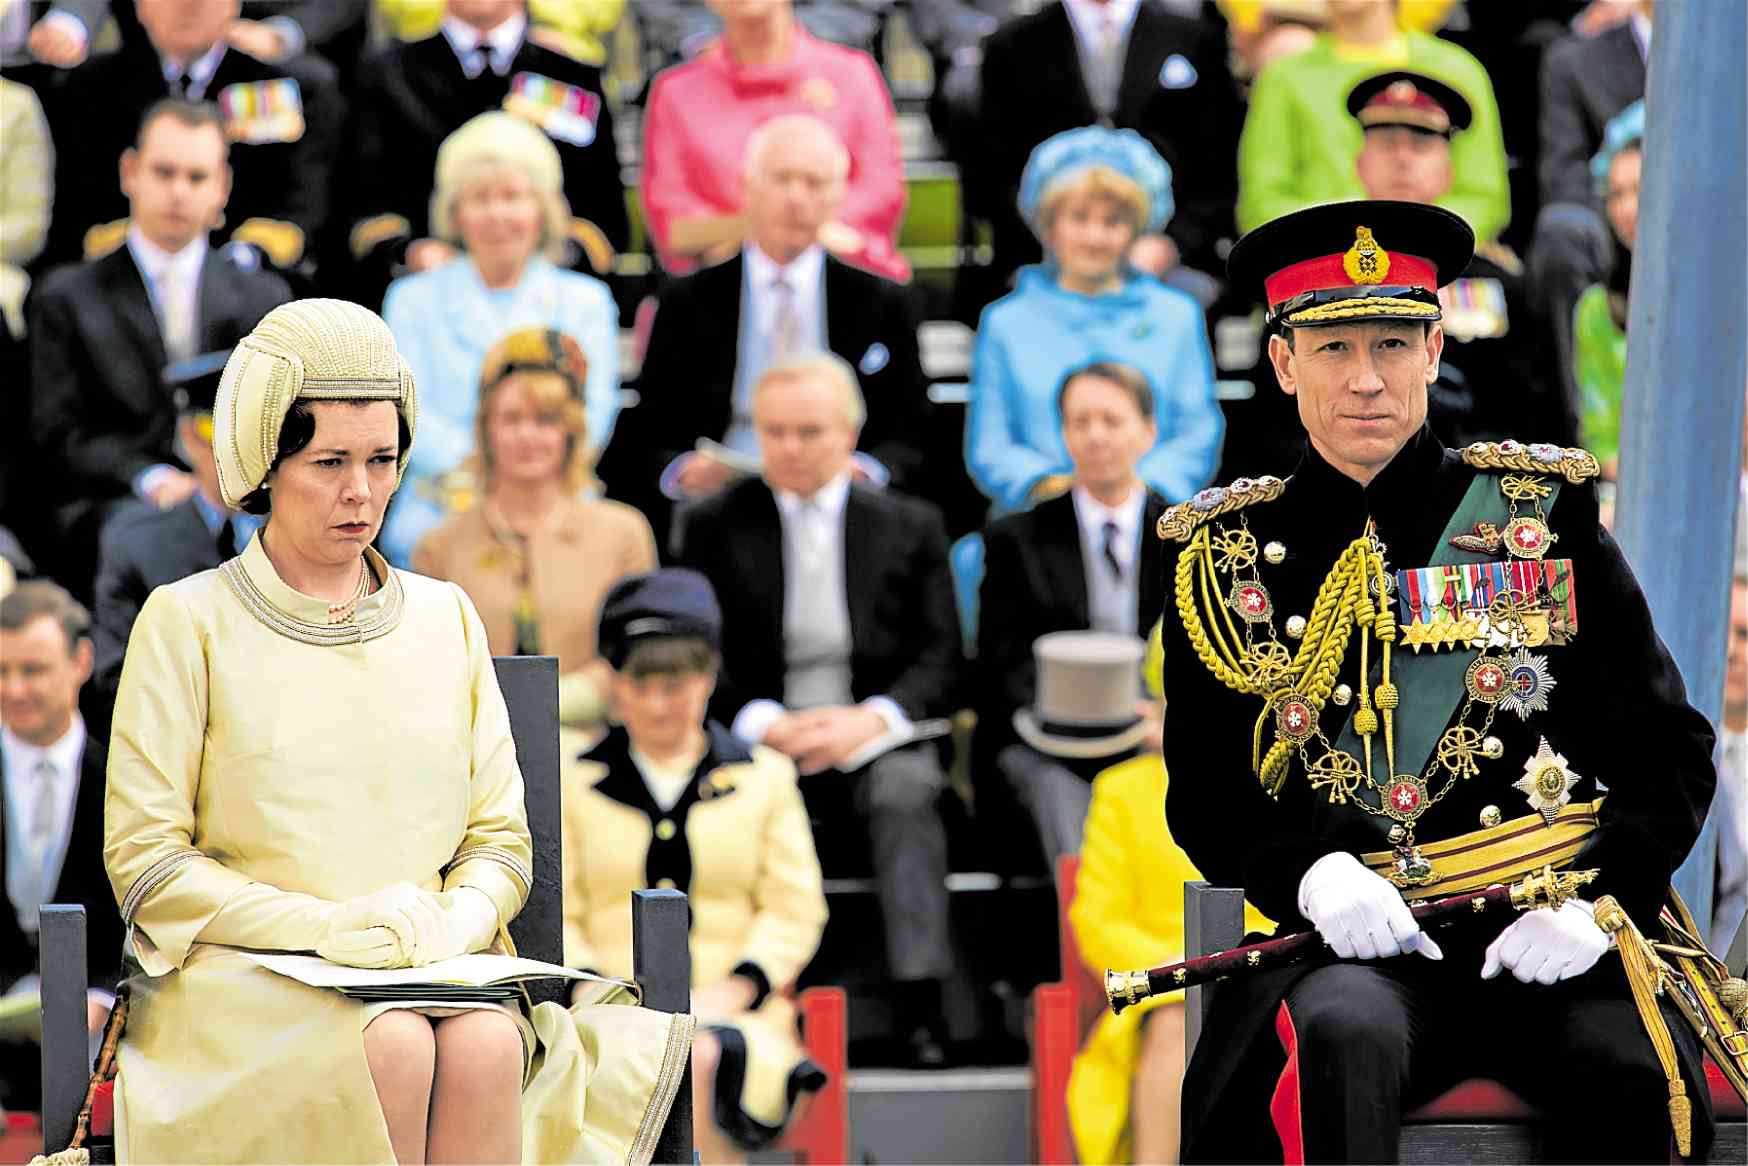 Olivia Colman (left) and Menzies in “The Crown”